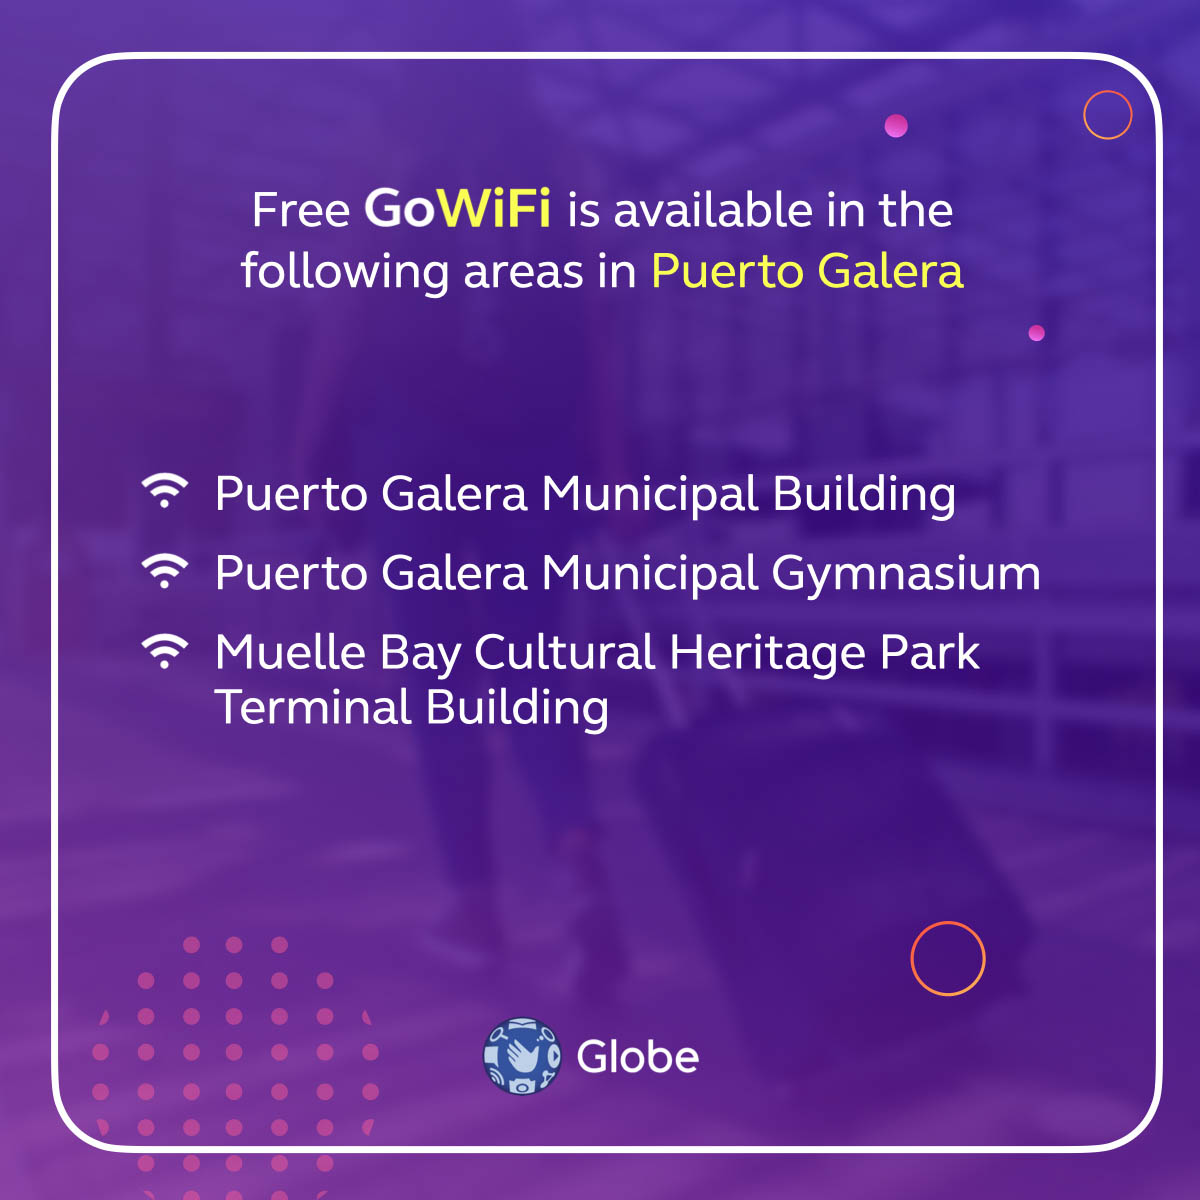 Puerto Galera Municipal Hall and other town areas, now GoWiFi zones